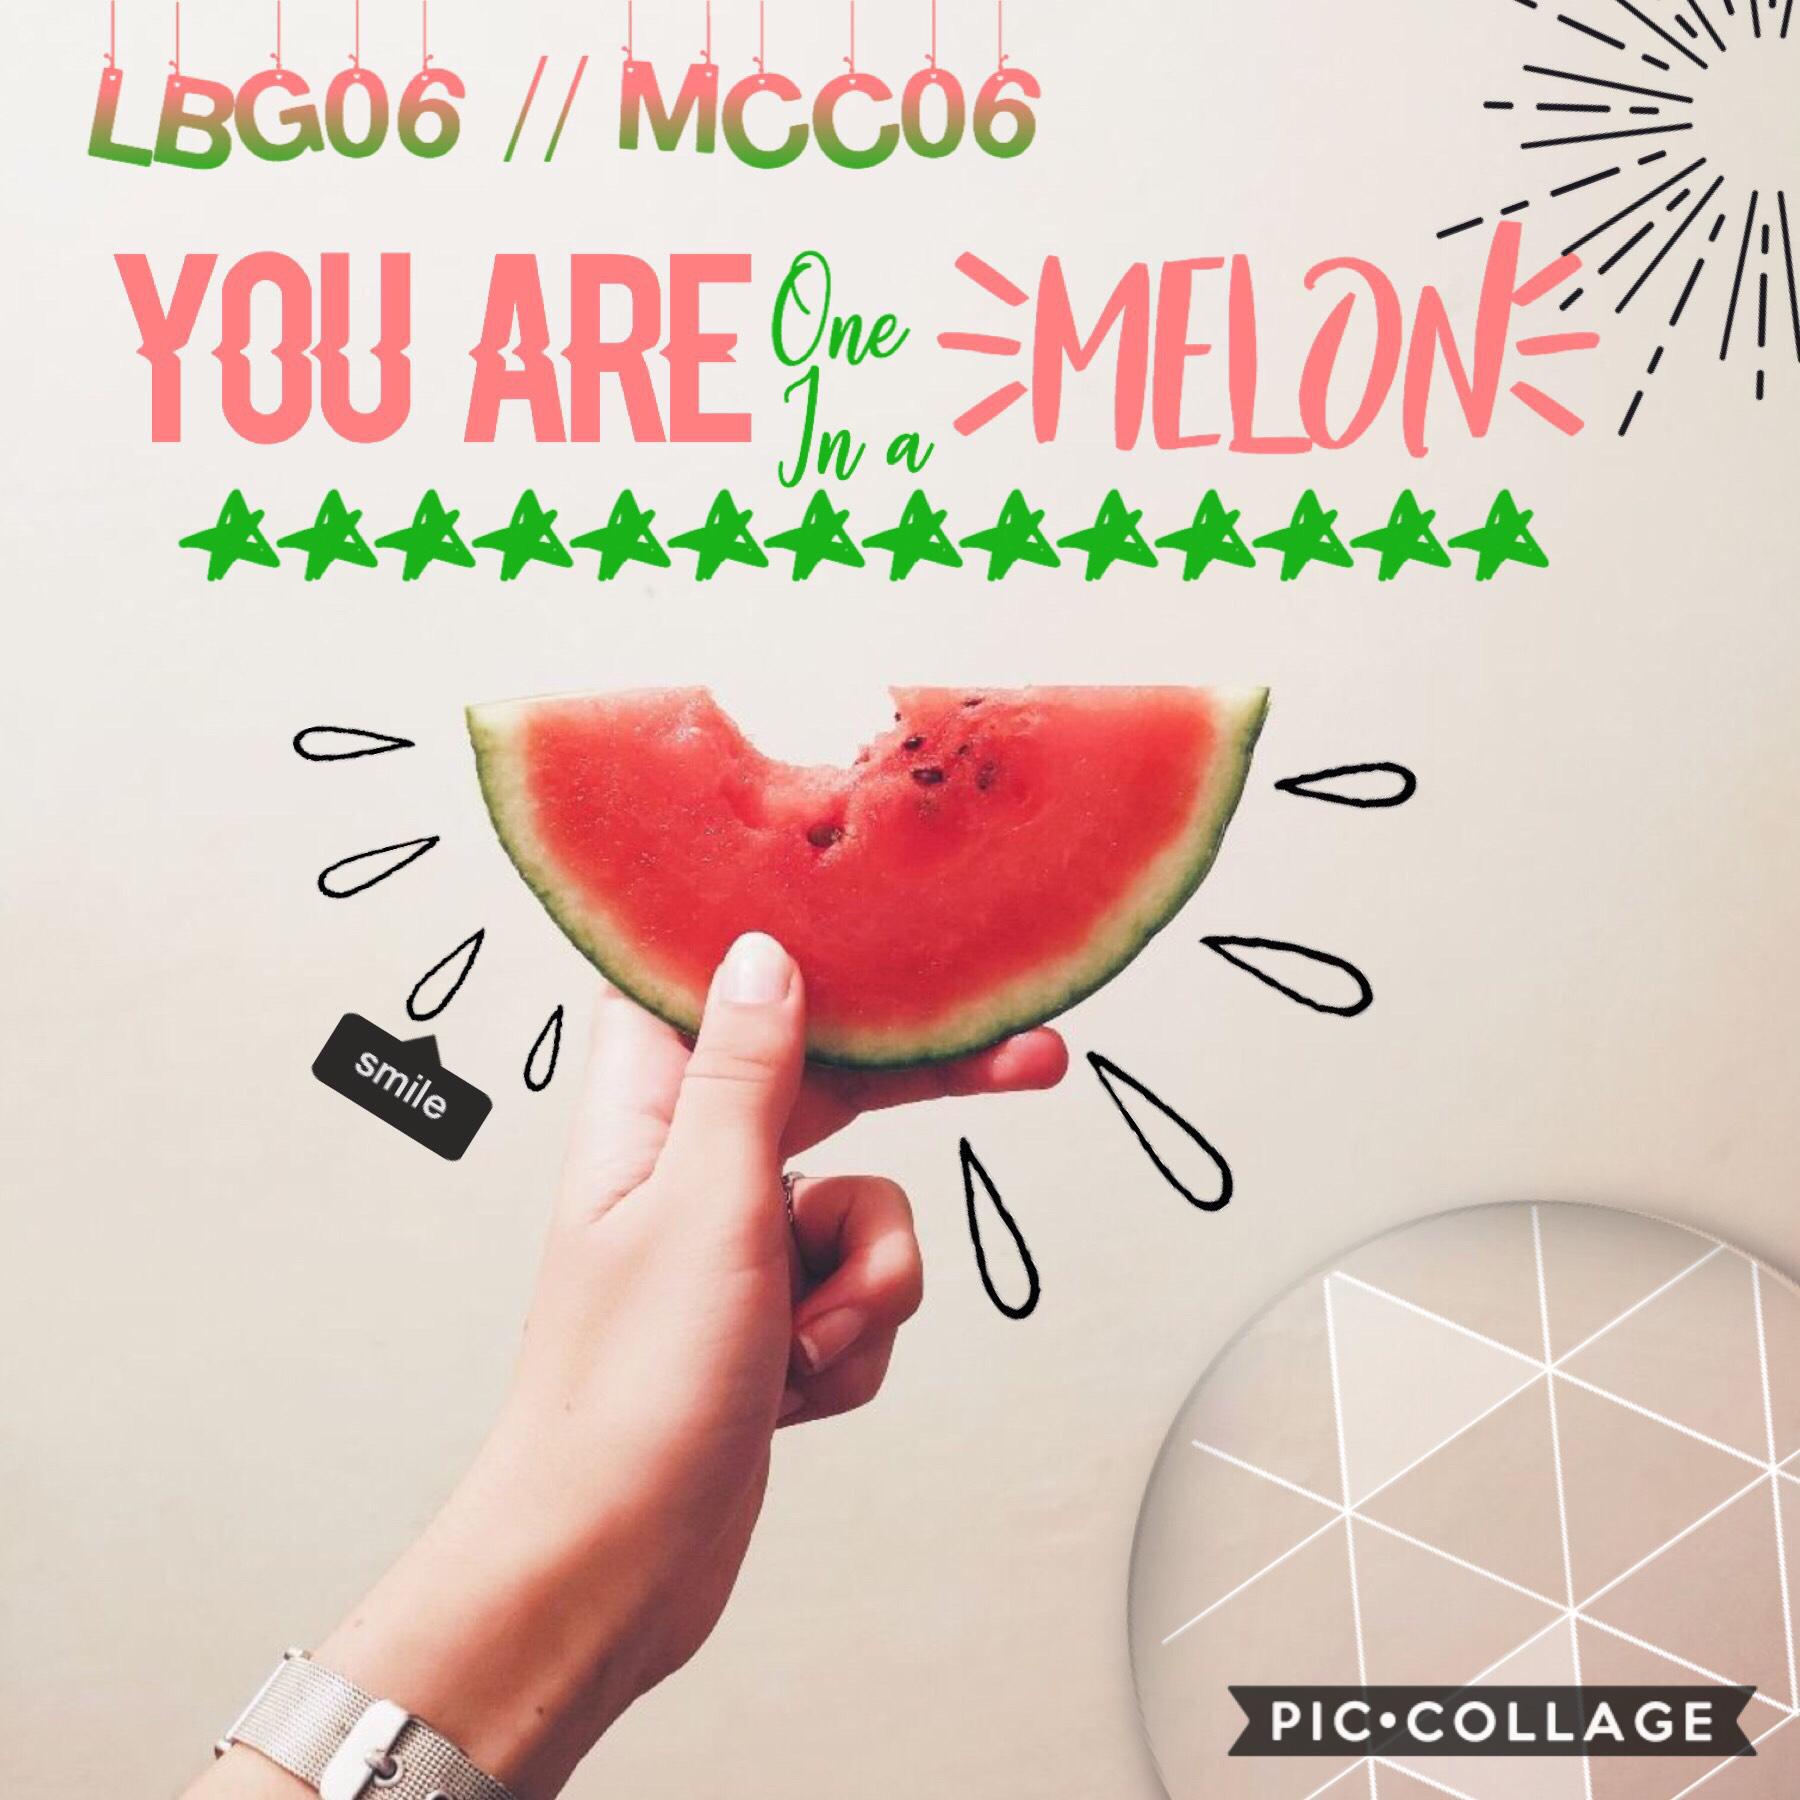 🍉tap🍉
Collab with the best MCC06! Sry I’m doing so many collabs with her. She just started pc again and I’m helping her out a bit.❤️

QOTD: 🍉or🍎
AOTD: 🍉🍉🍉

Xoxooxo❤️